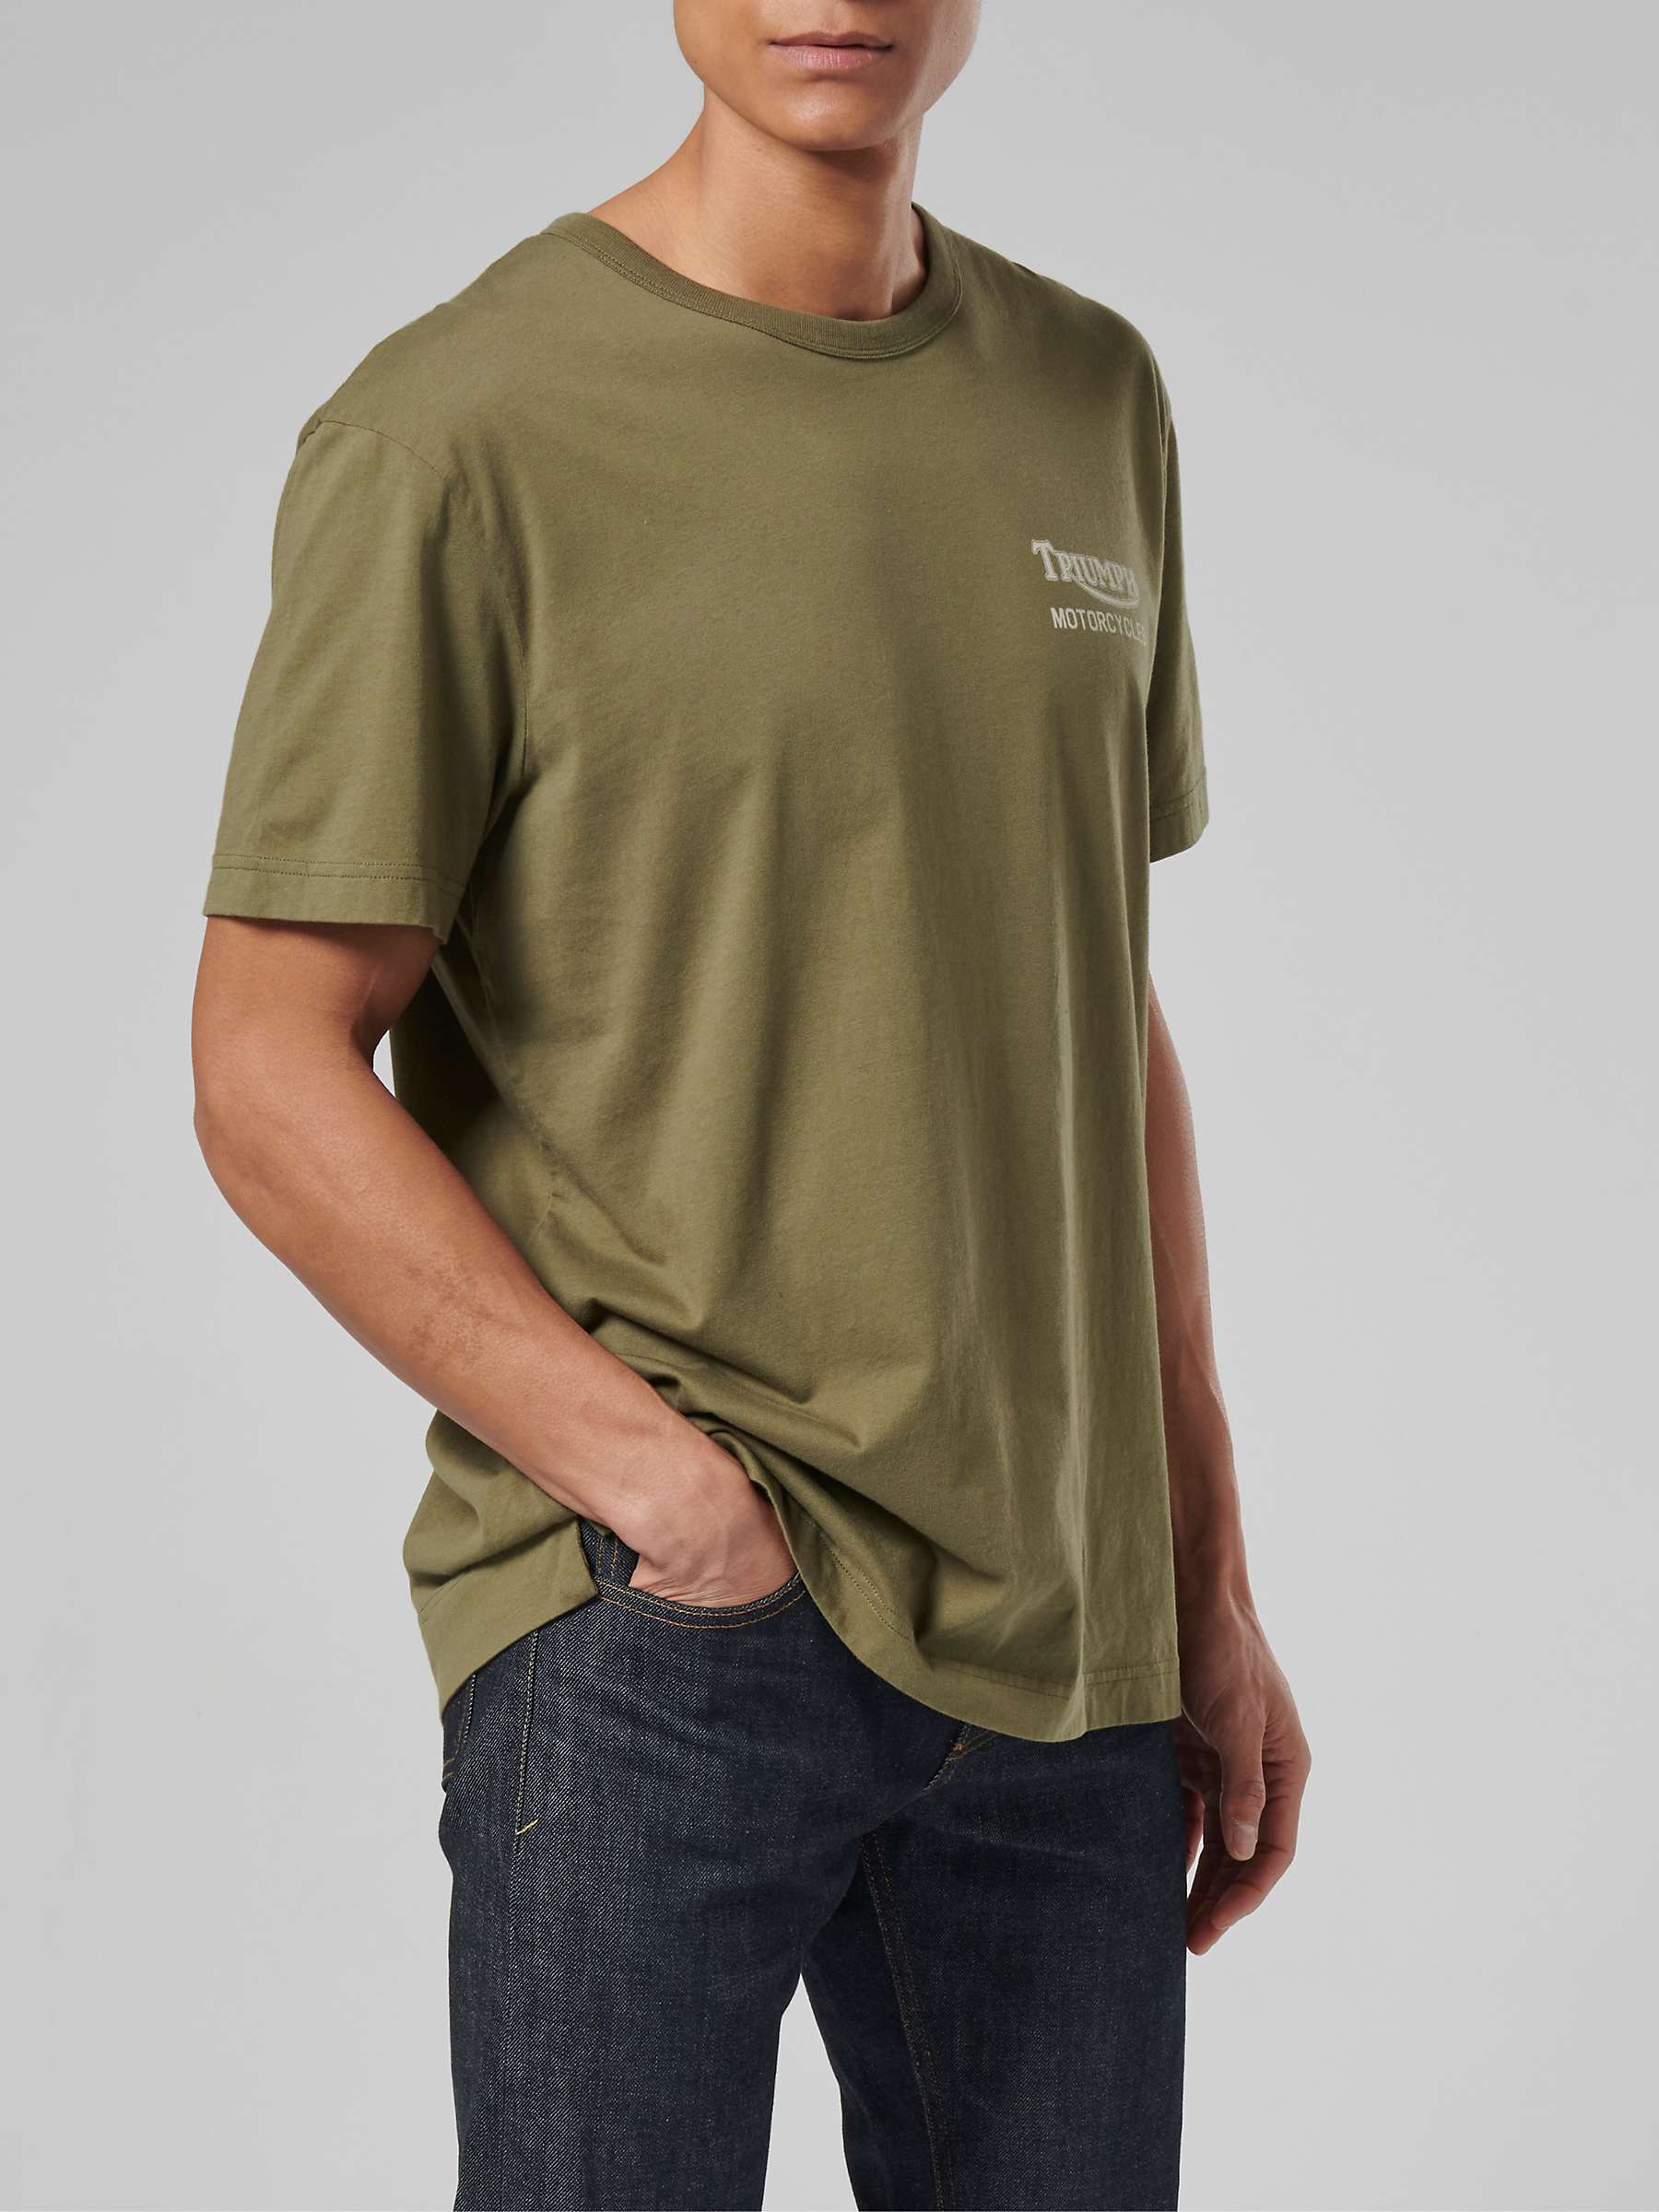 Buy Triumph Motorcycles Adcote T-Shirt Online at johnlewis.com